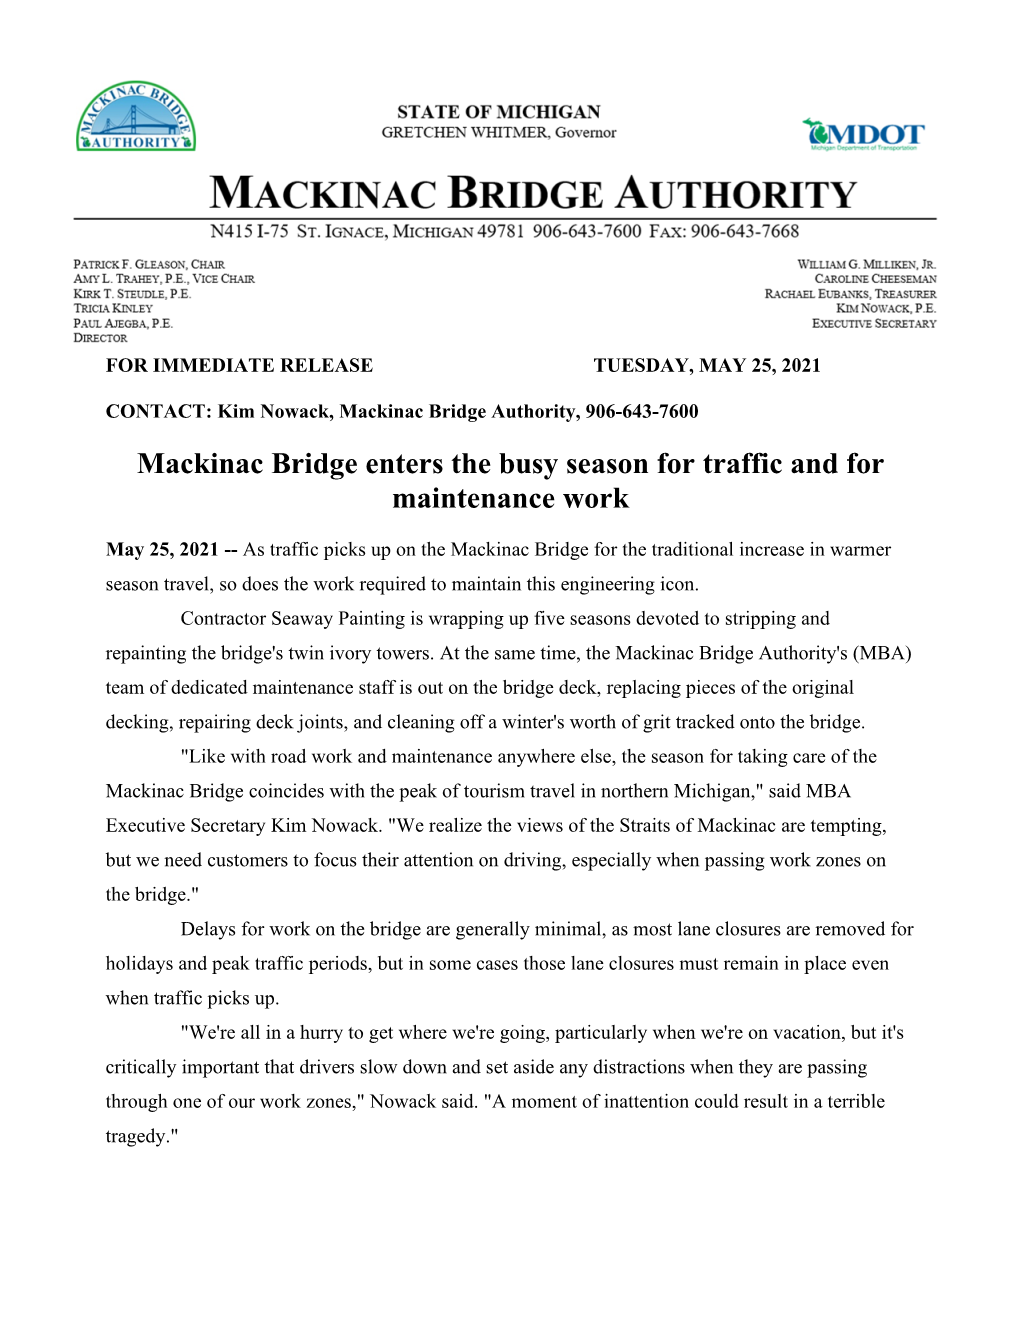 Mackinac Bridge Enters the Busy Season for Traffic and for Maintenance Work